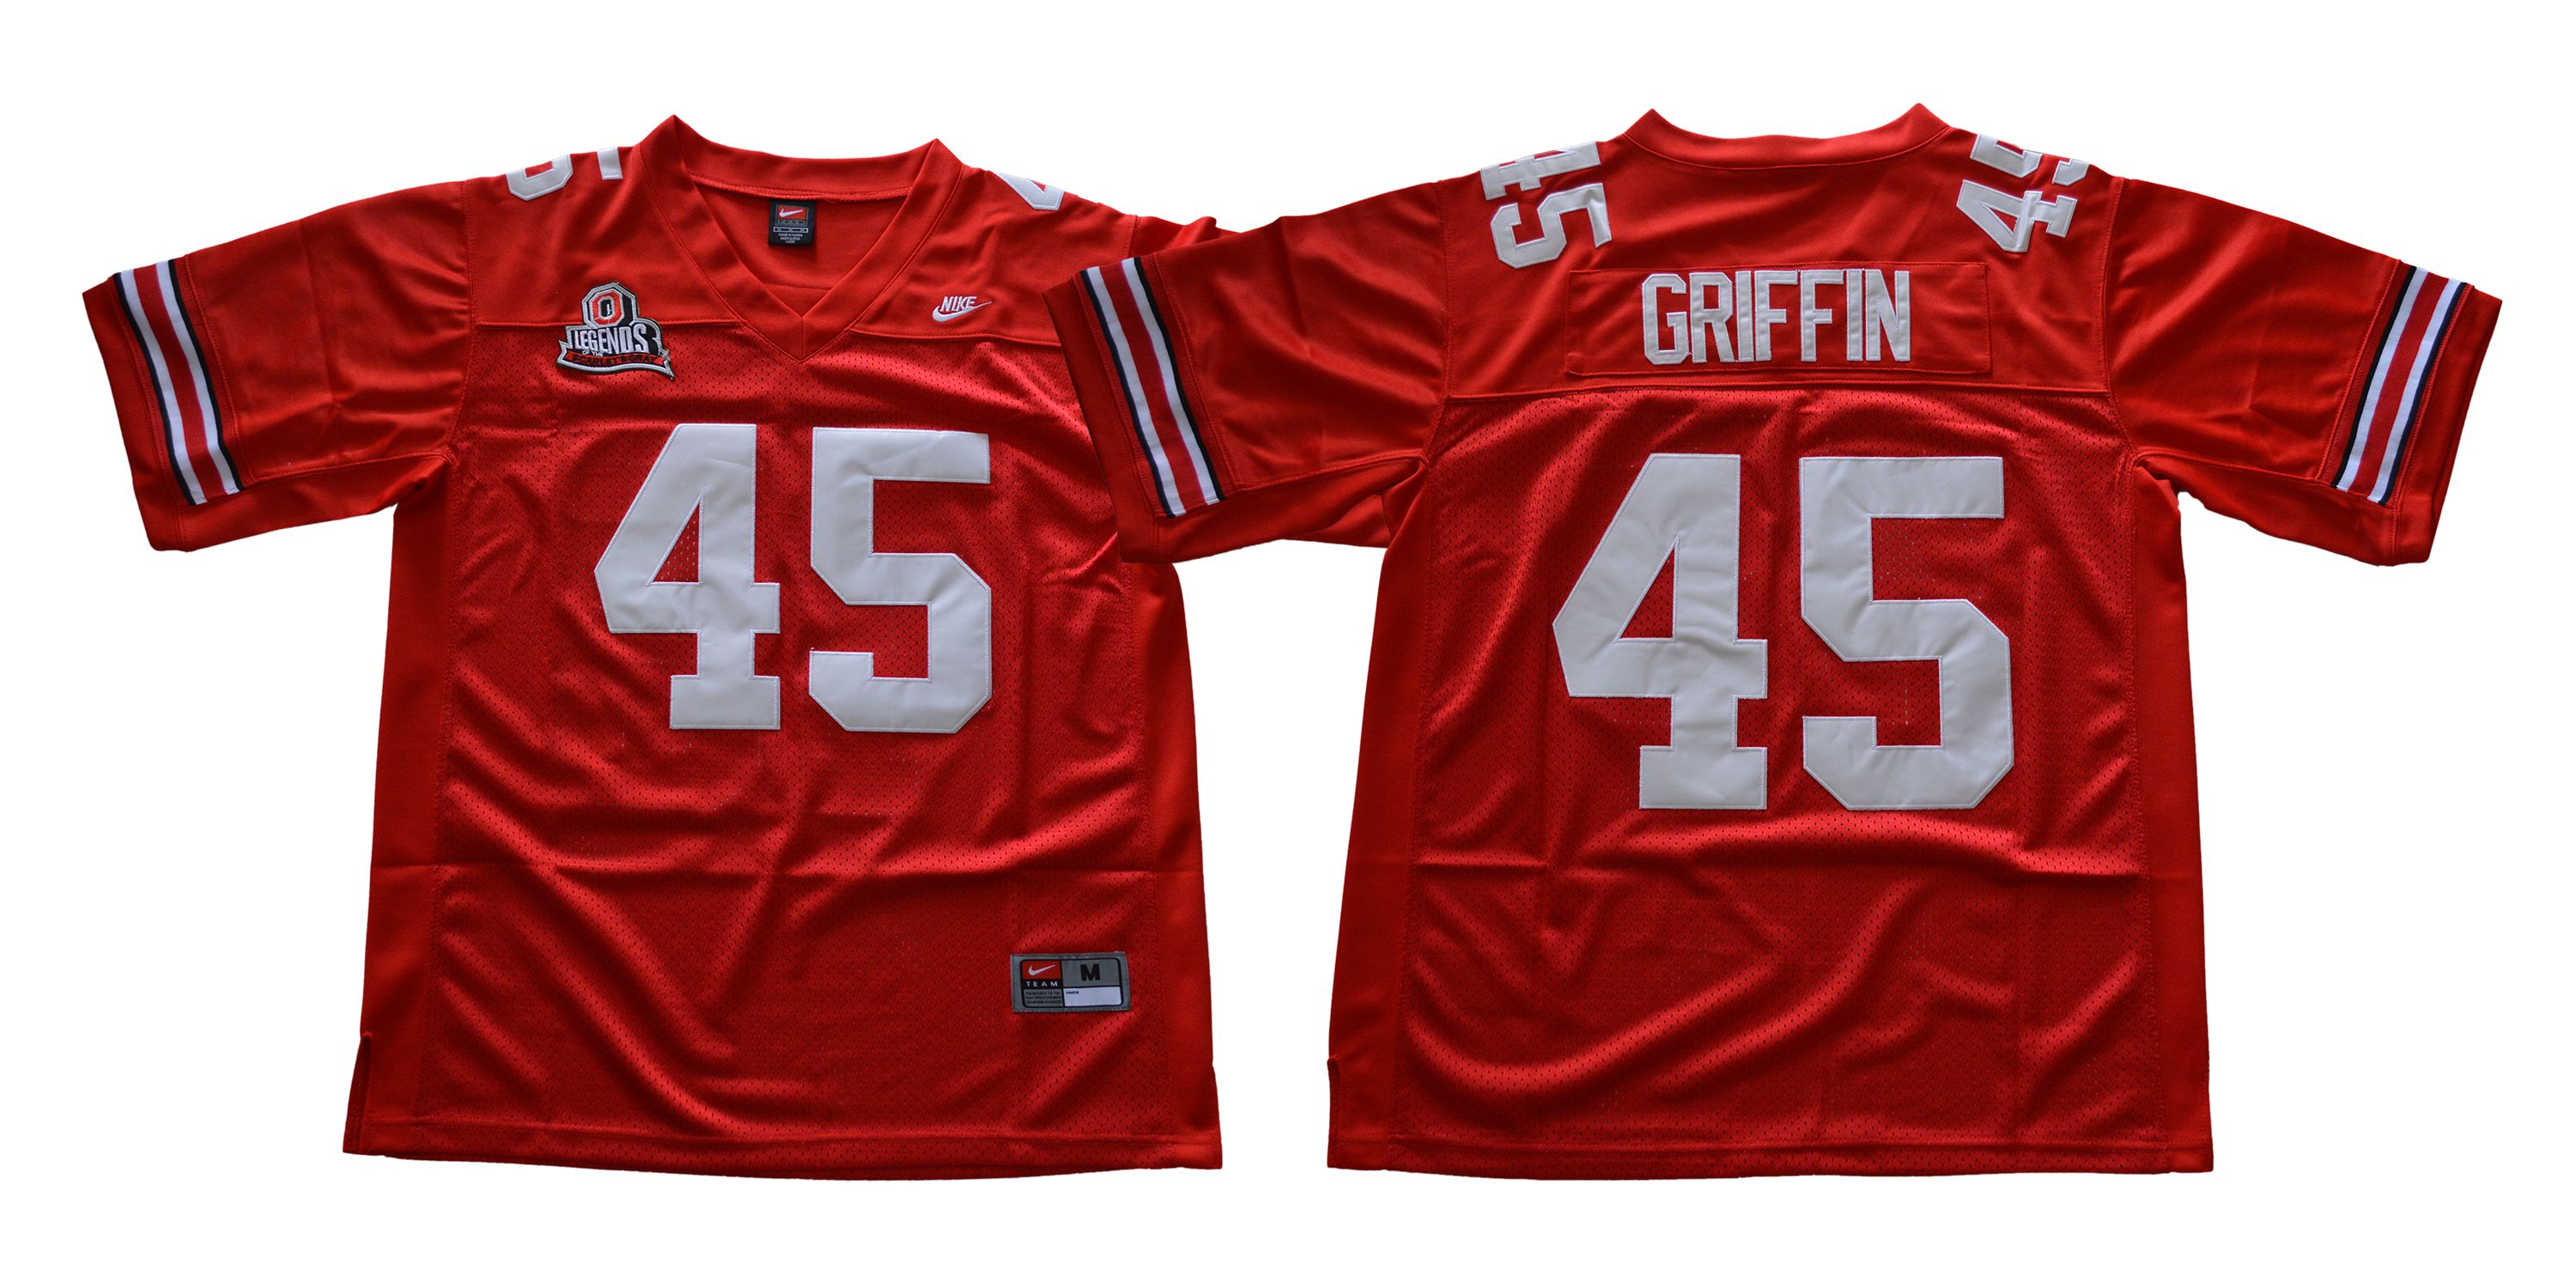 Men Ohio State Buckeyes 45 Griffin Red Throwback Nike NCAA Jerseys